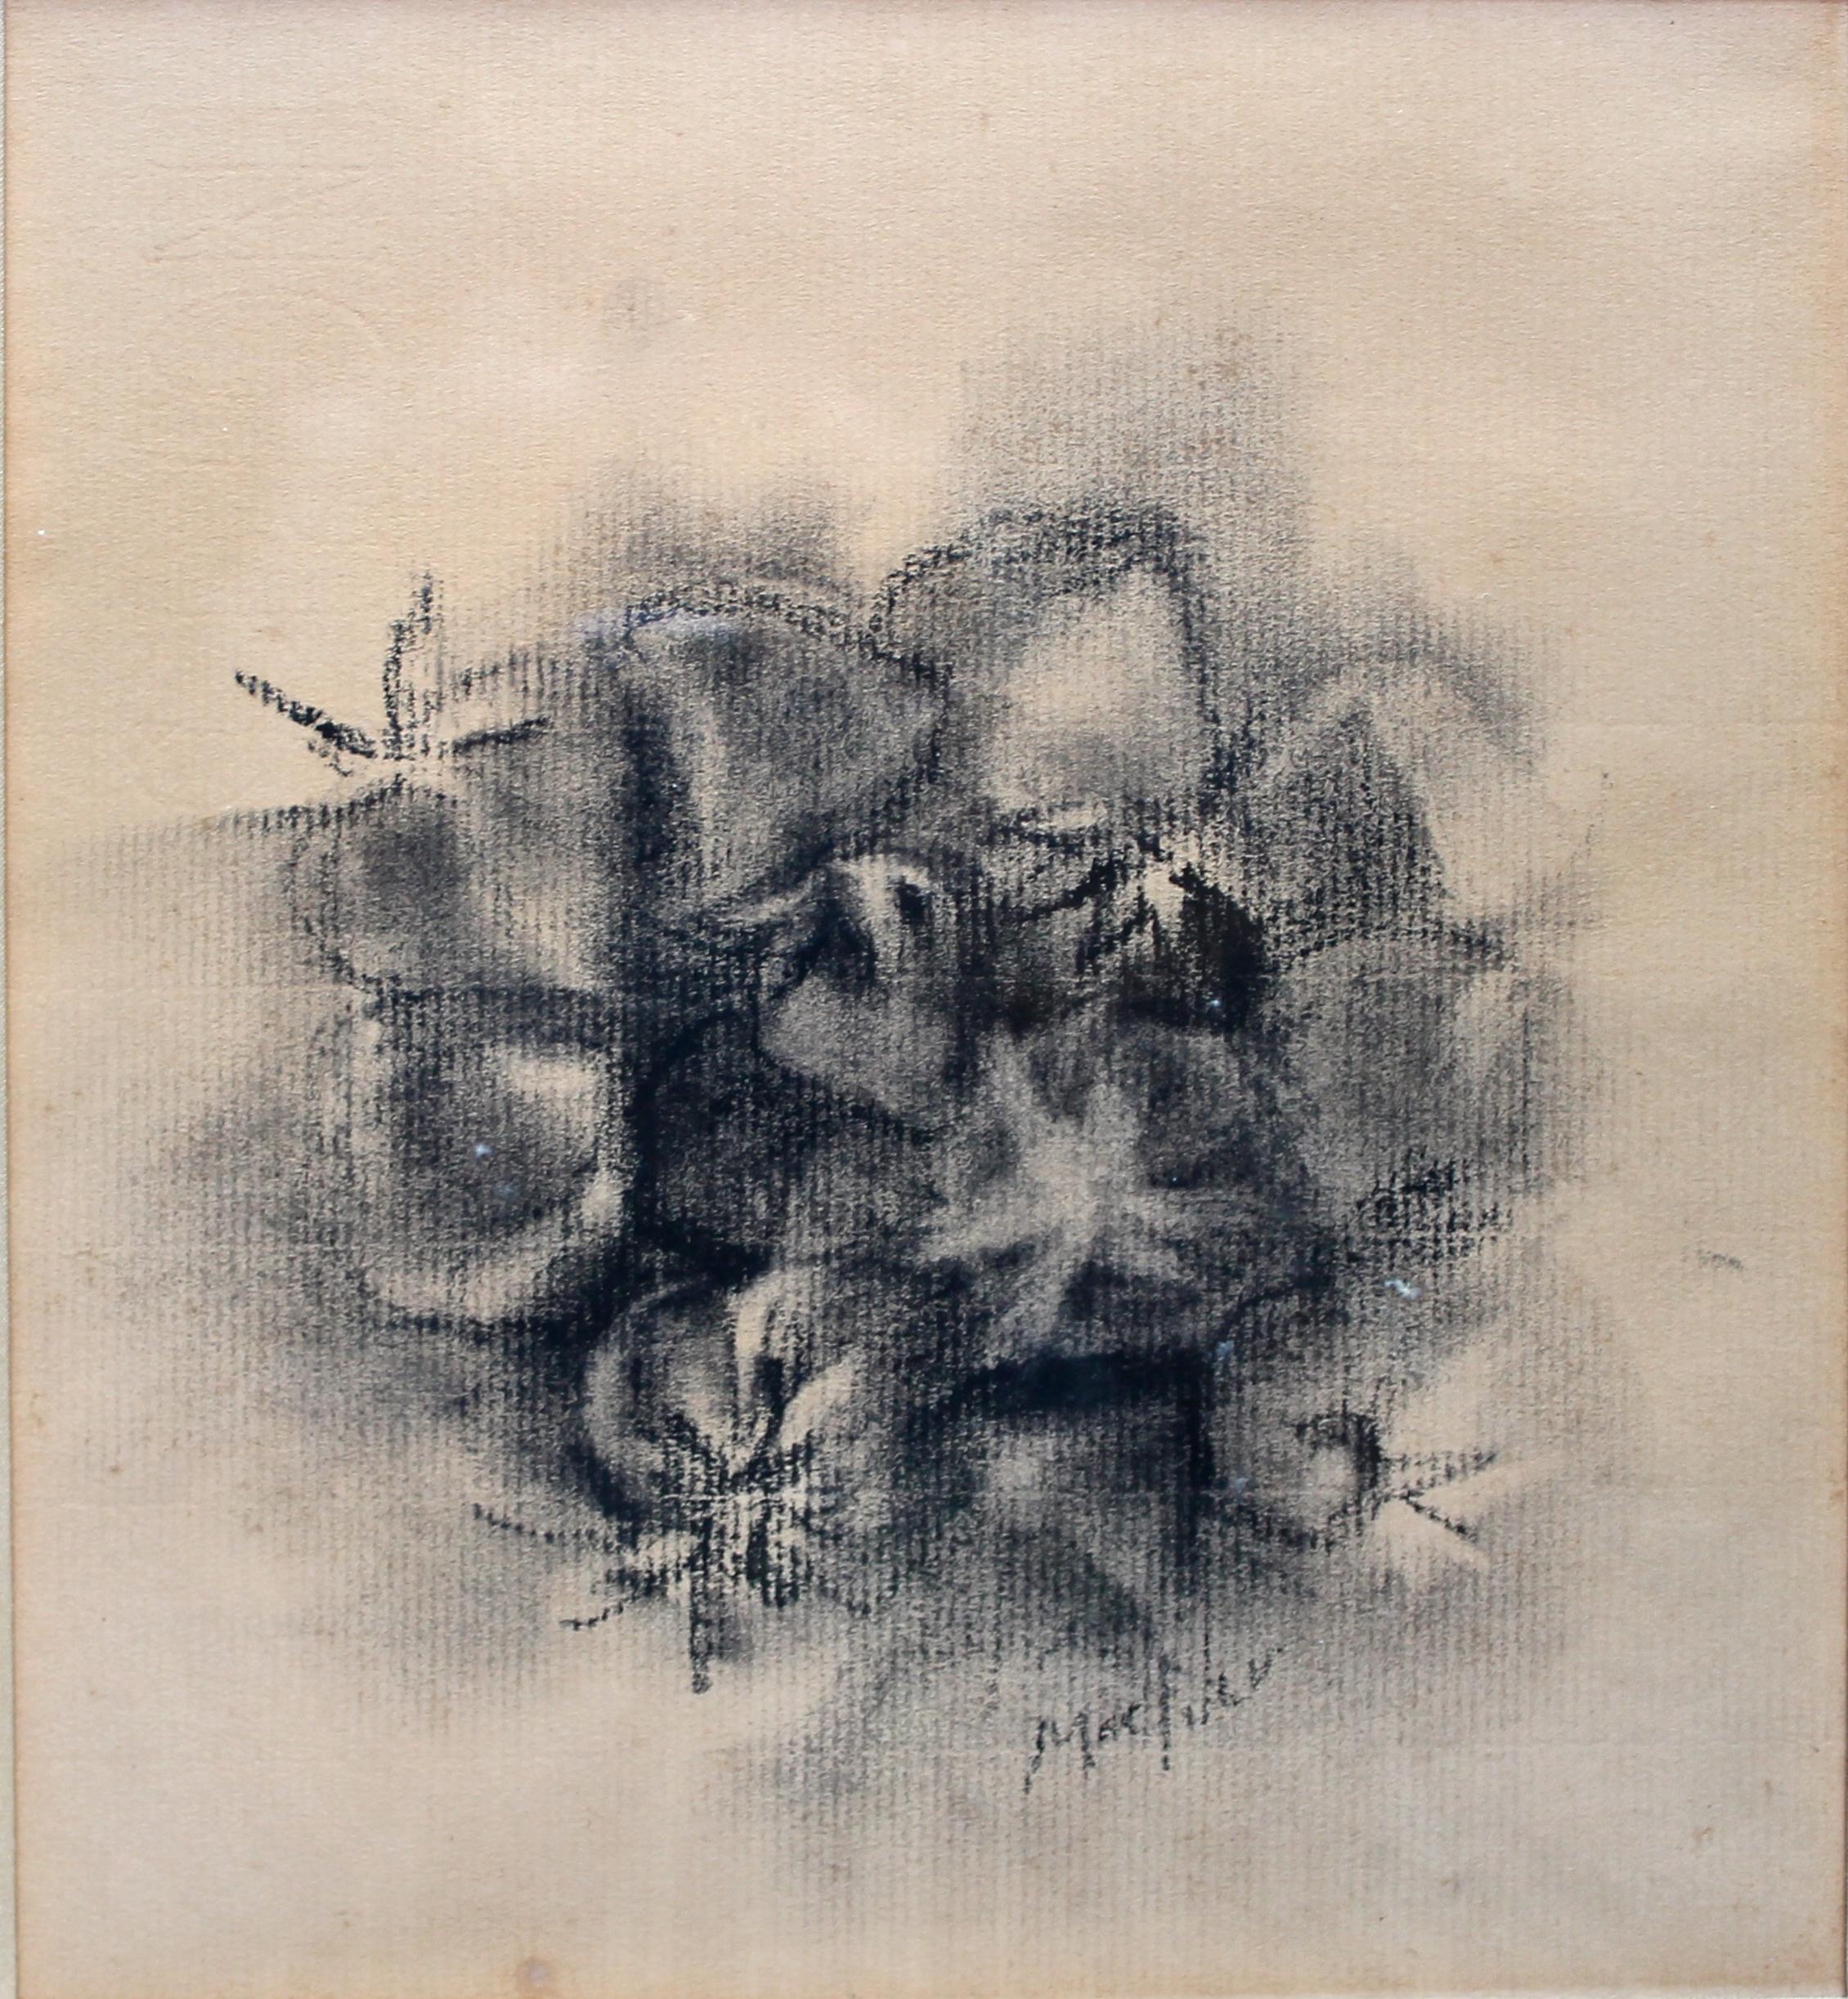 Loren Maciver (American 1909-1998) drawing of fruit conte crayon on pastel paper. Measures: Matted and framed 13 1/2